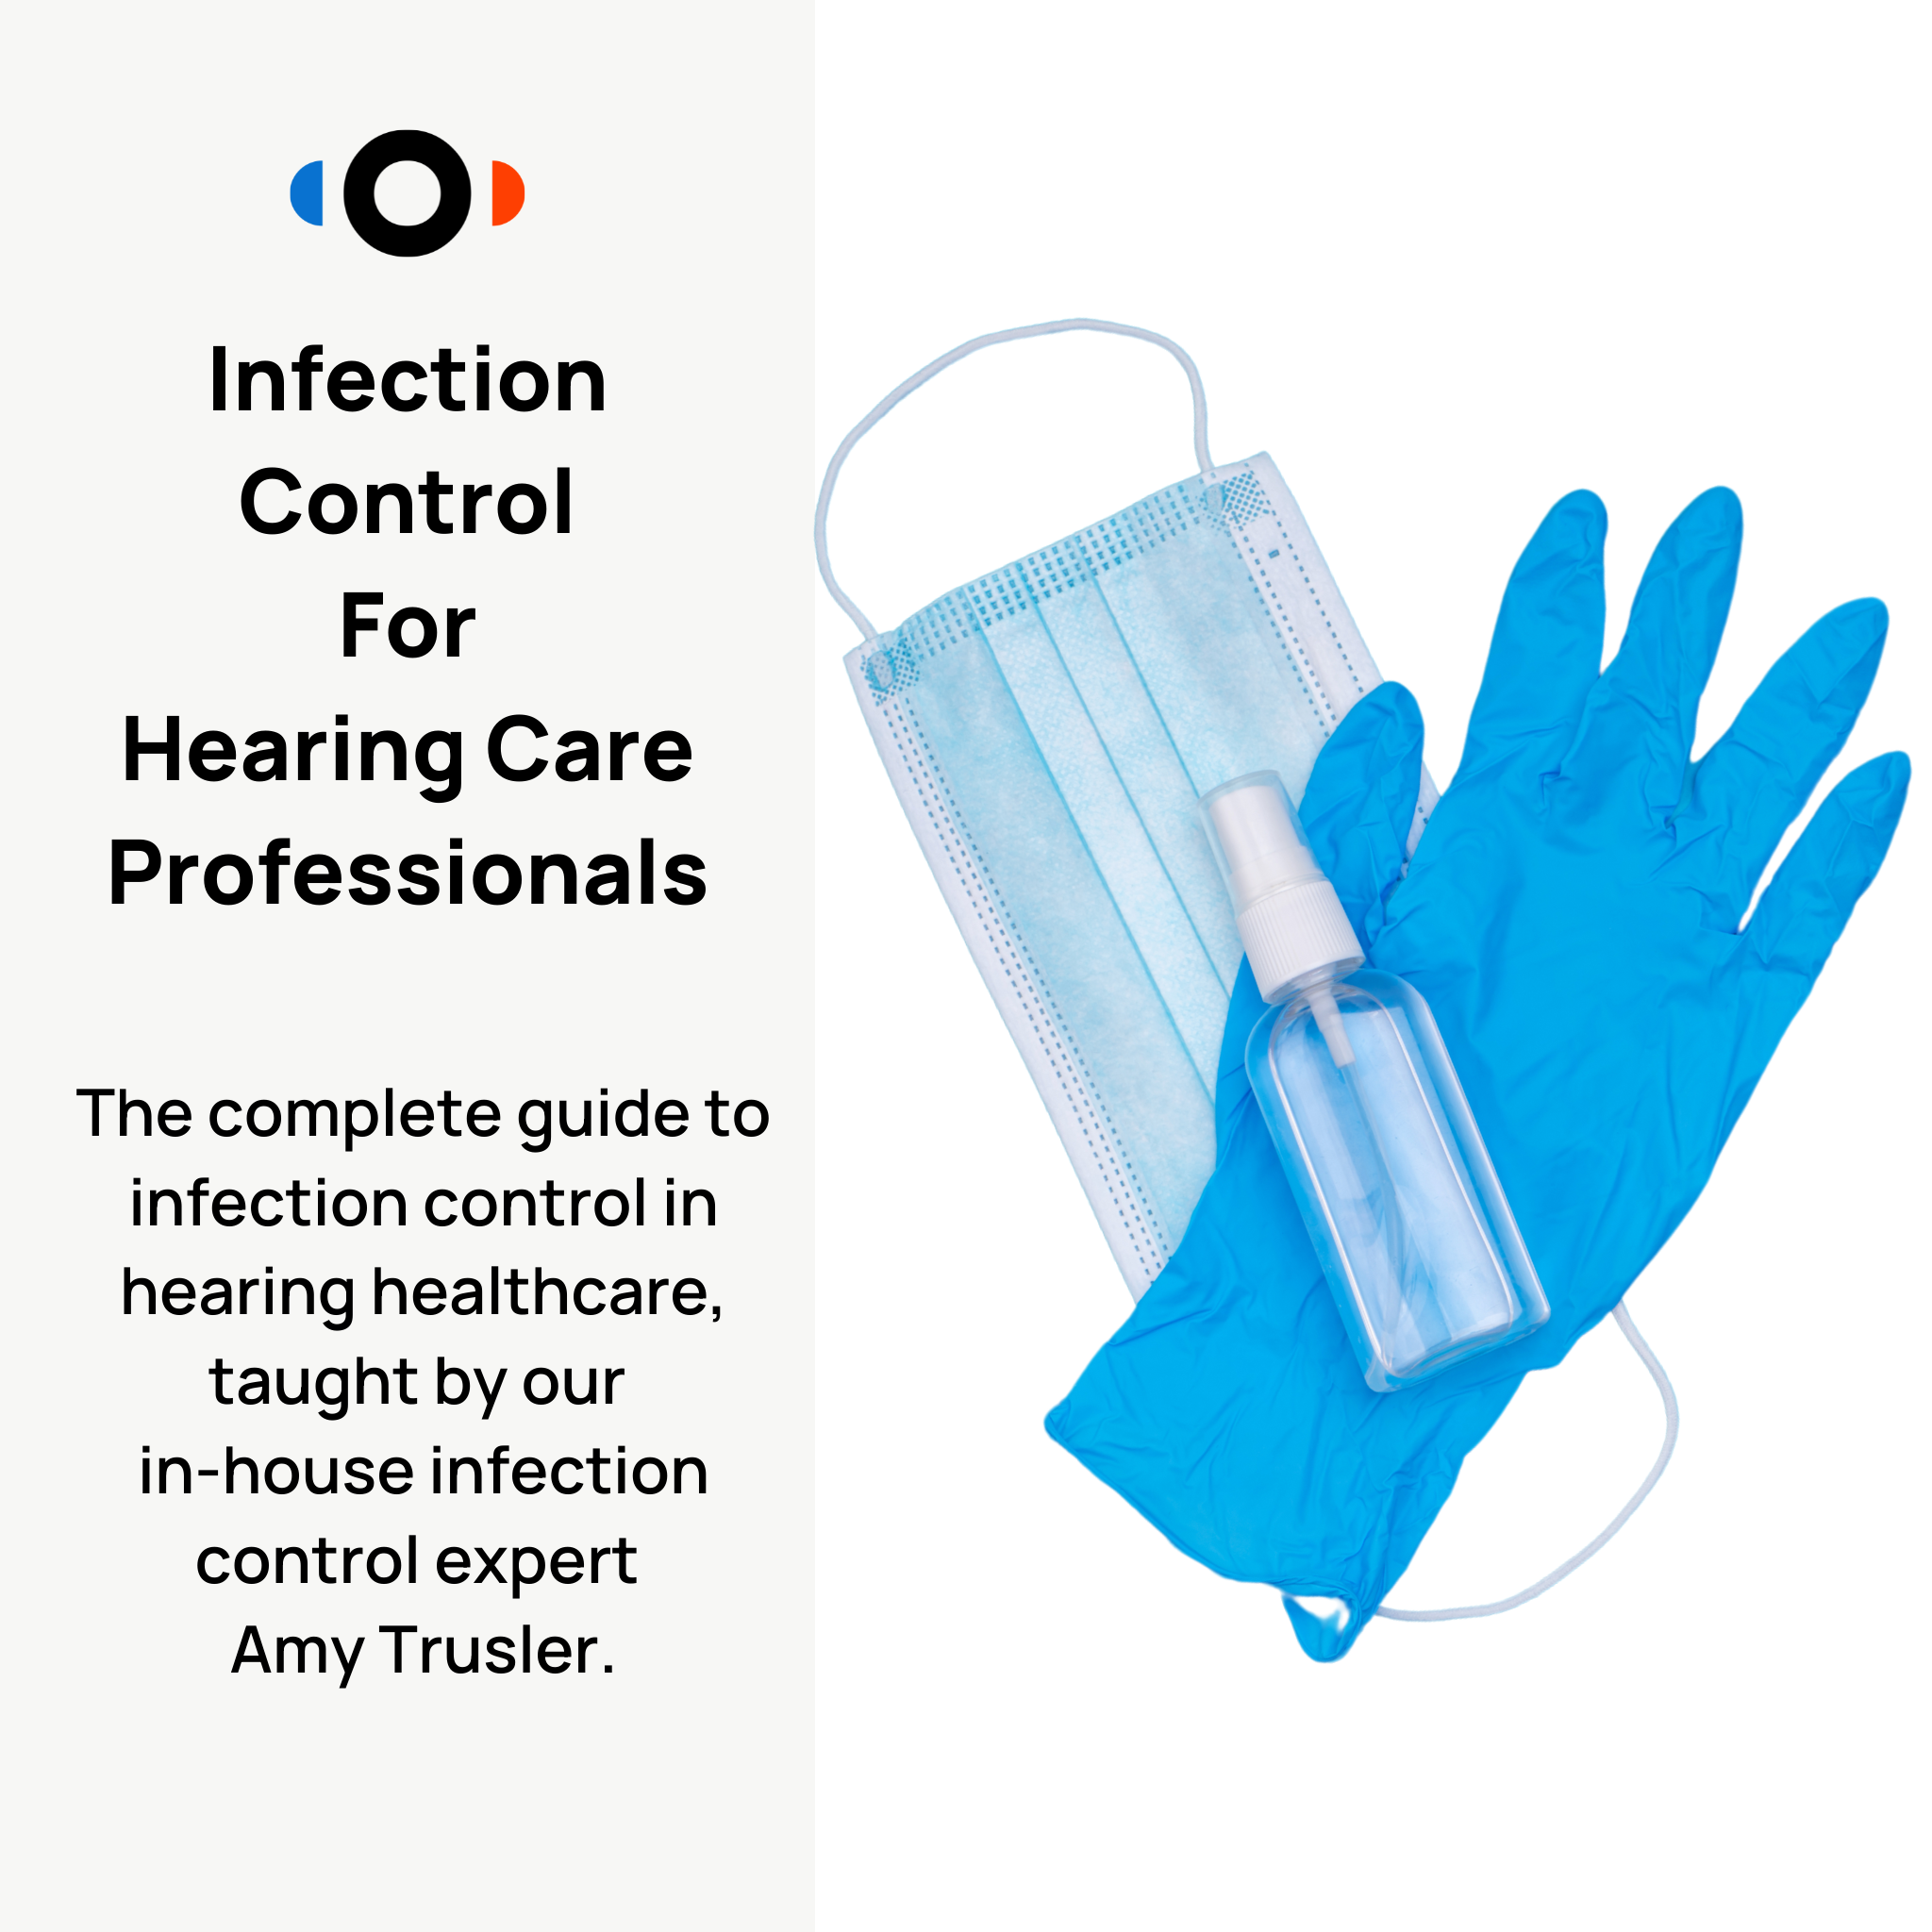 Infection Control For Hearing Care Professionals